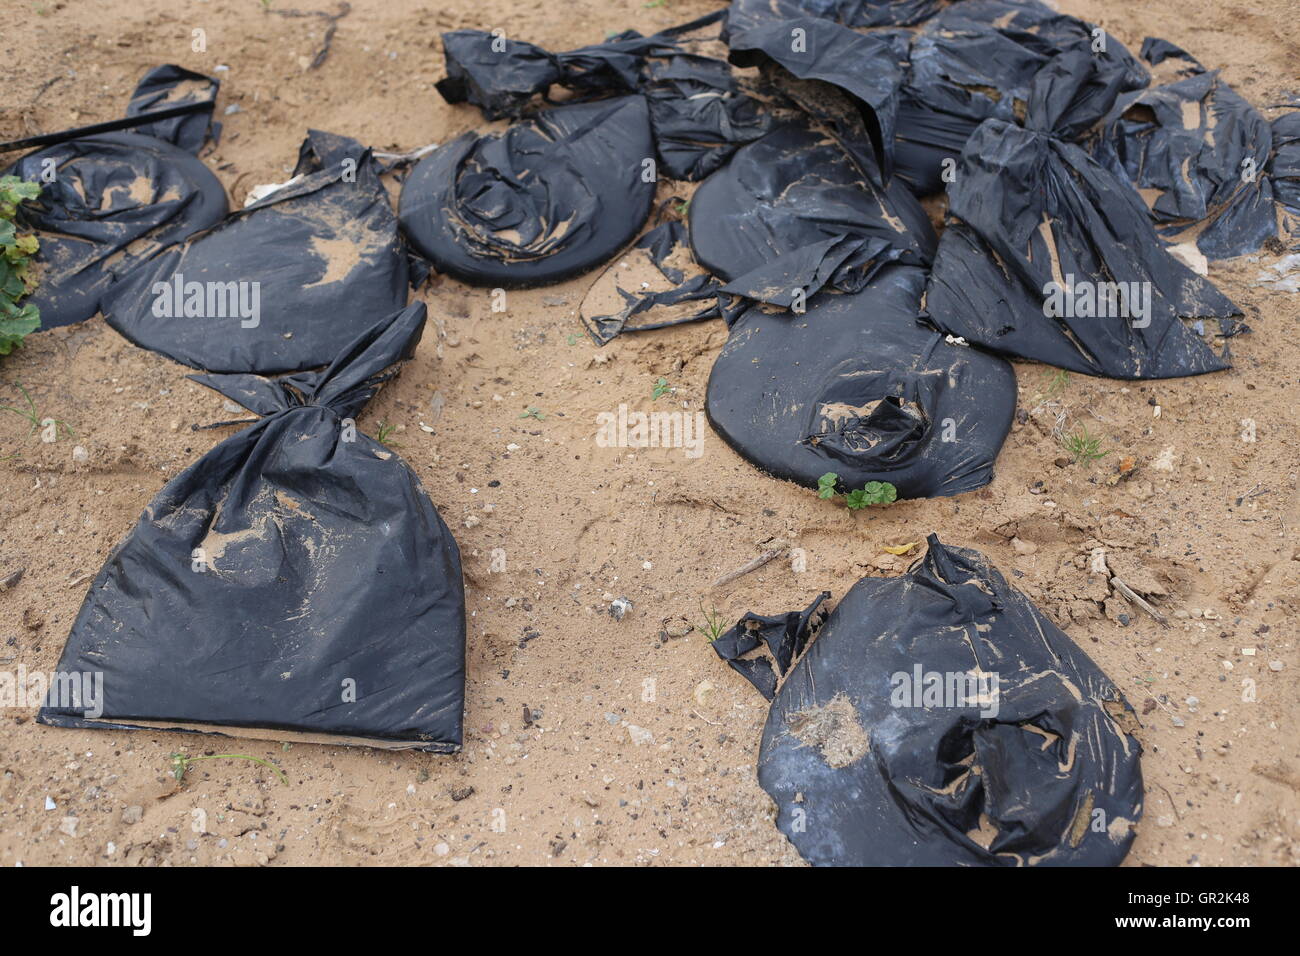 Plastic bags filled with ground in a cultivated field: A pile of  black plastic bags filled with ground in farmland closeup. Agricultural plastic usag. Stock Photo